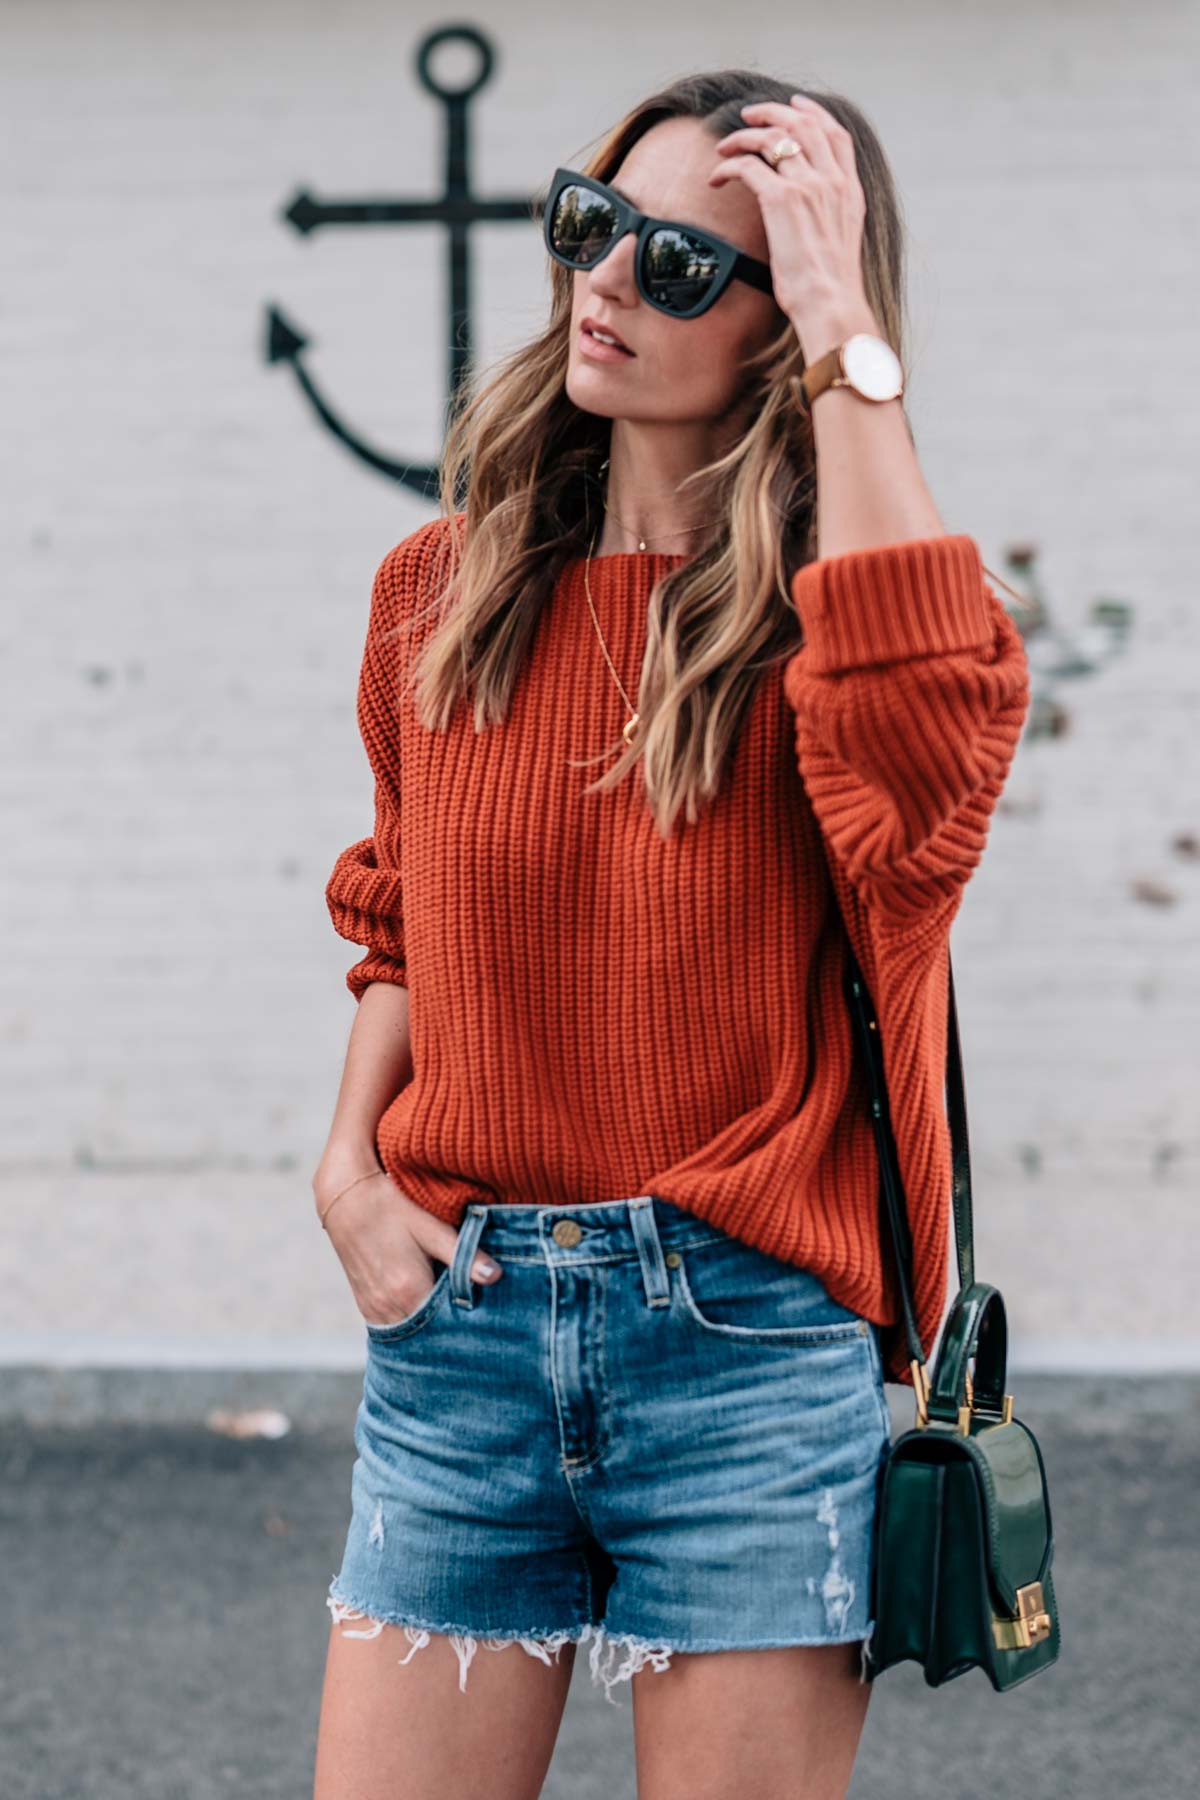 Jess Ann Kirby's fall style in a chunky knit sweater in pantone autumn maple and jean shorts